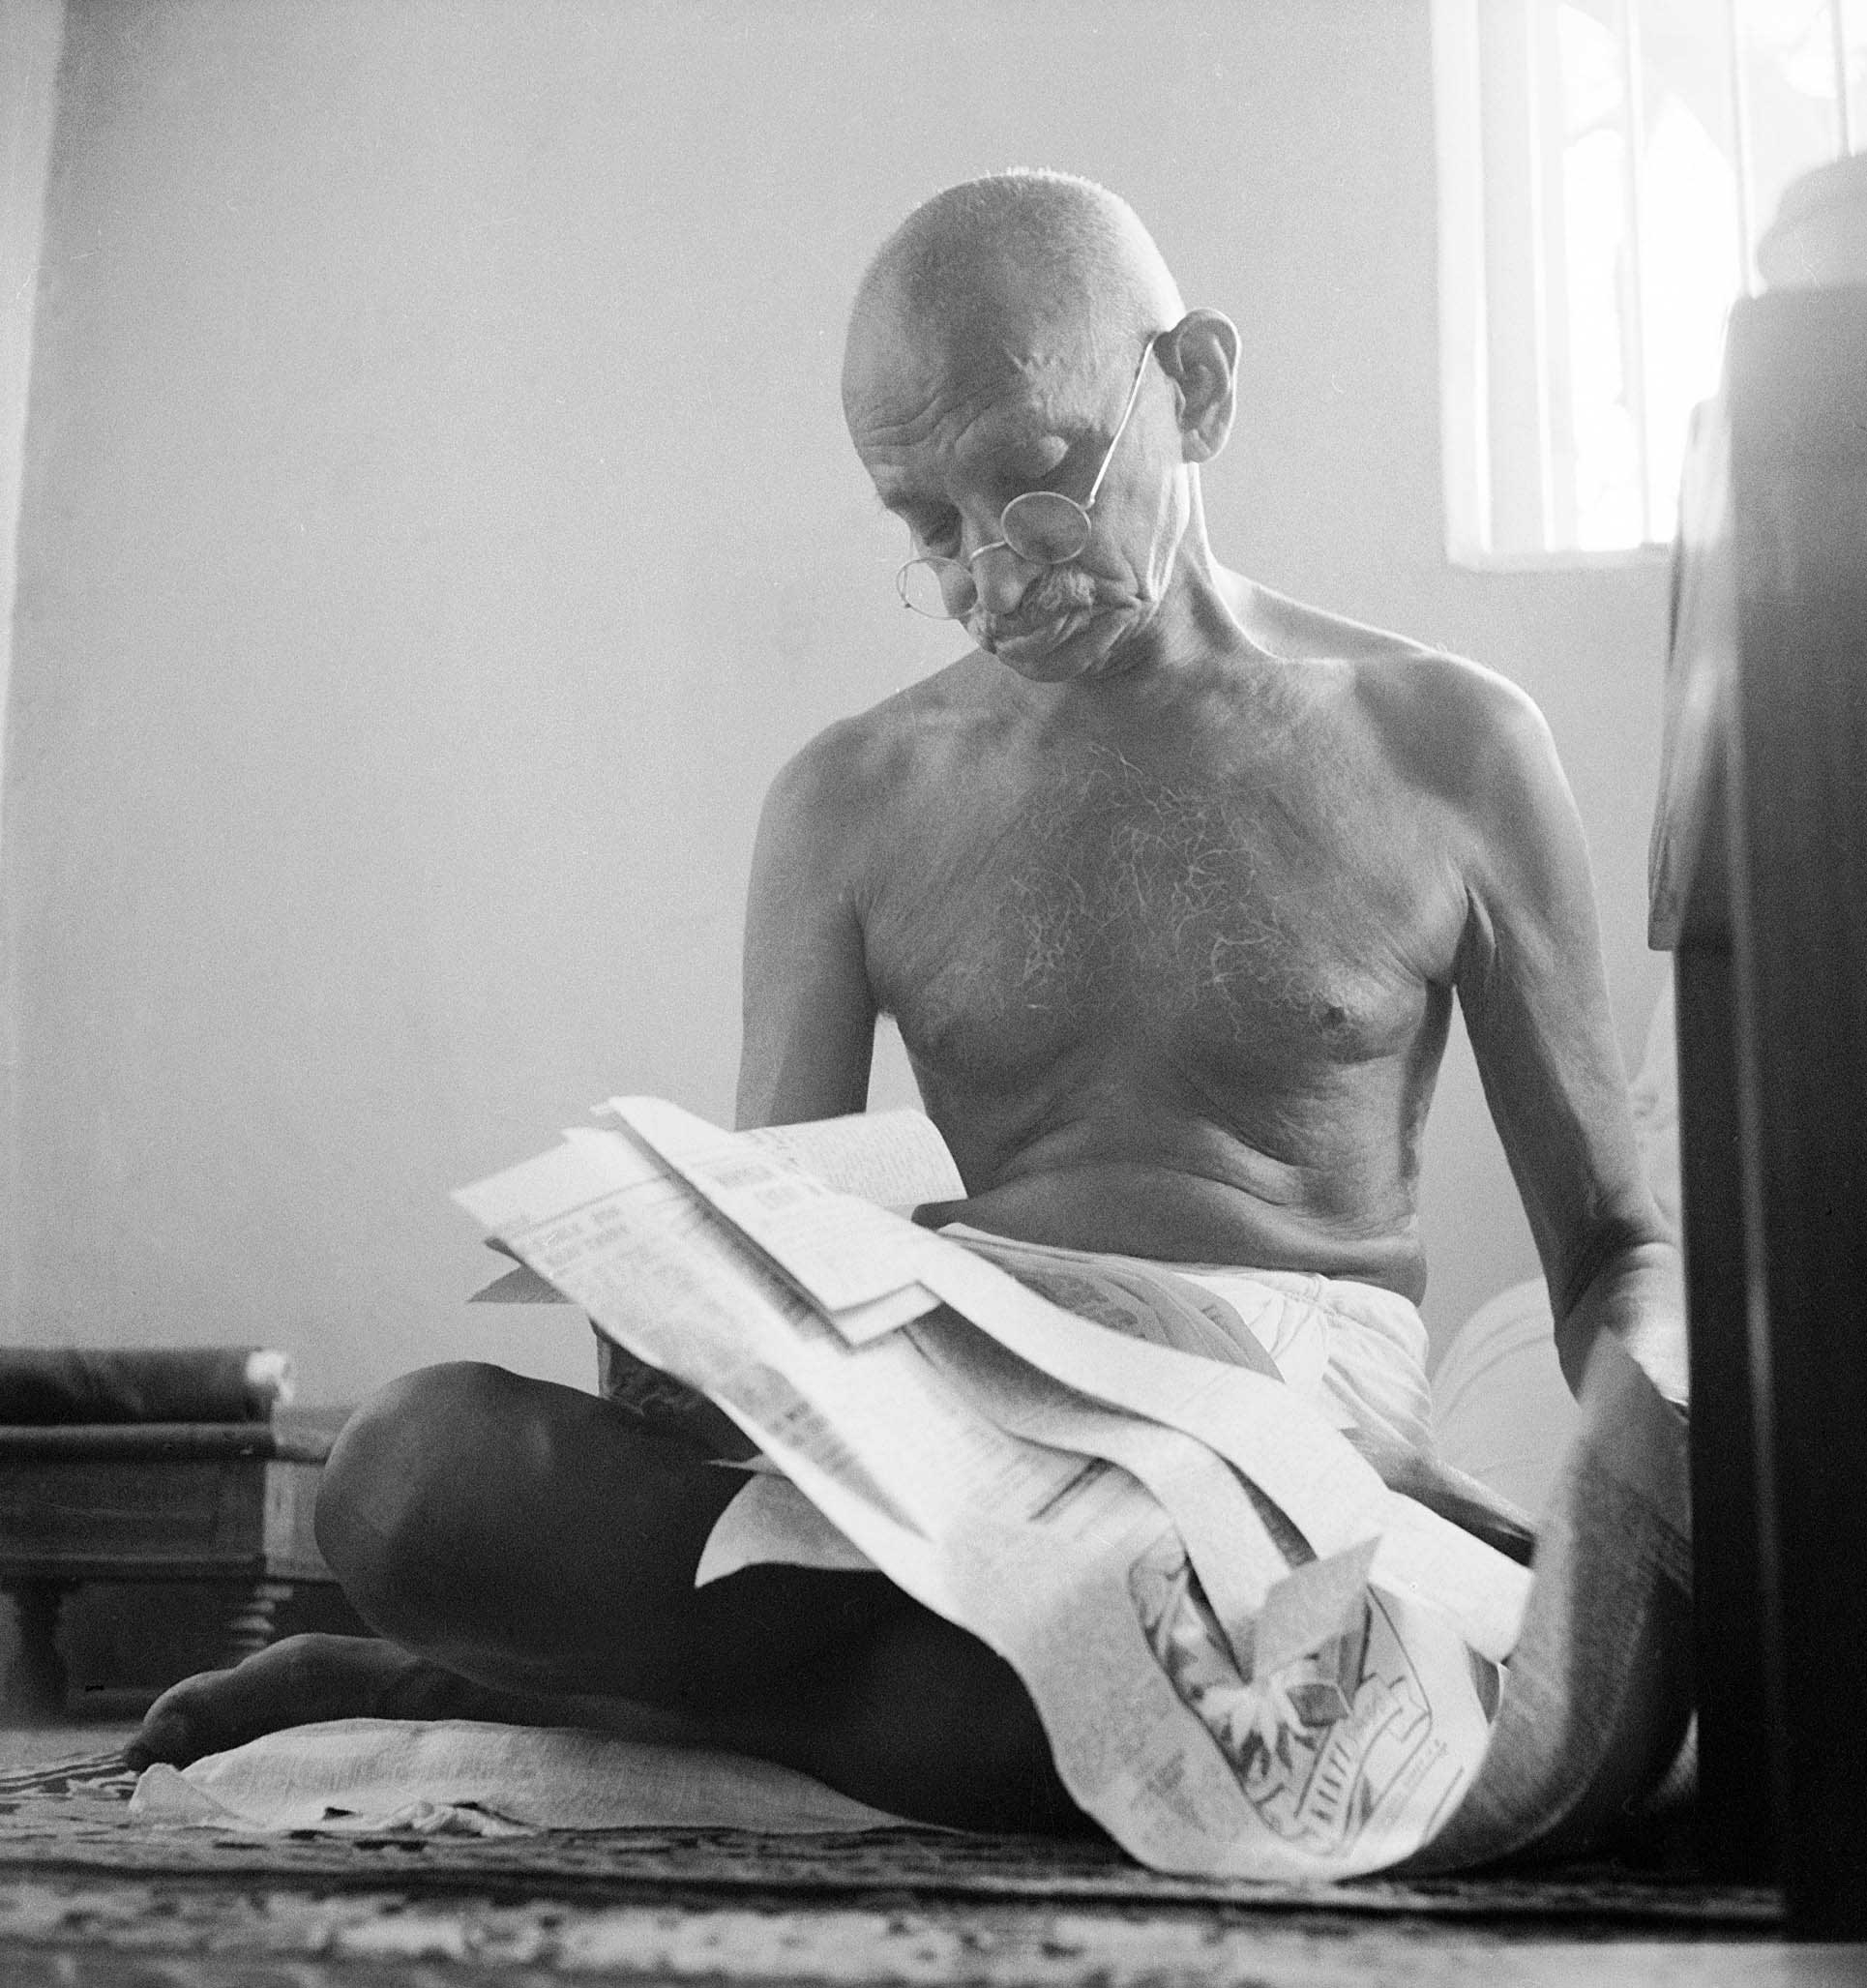 Gandhi and His Spinning Wheel: the Story Behind an Iconic Photo